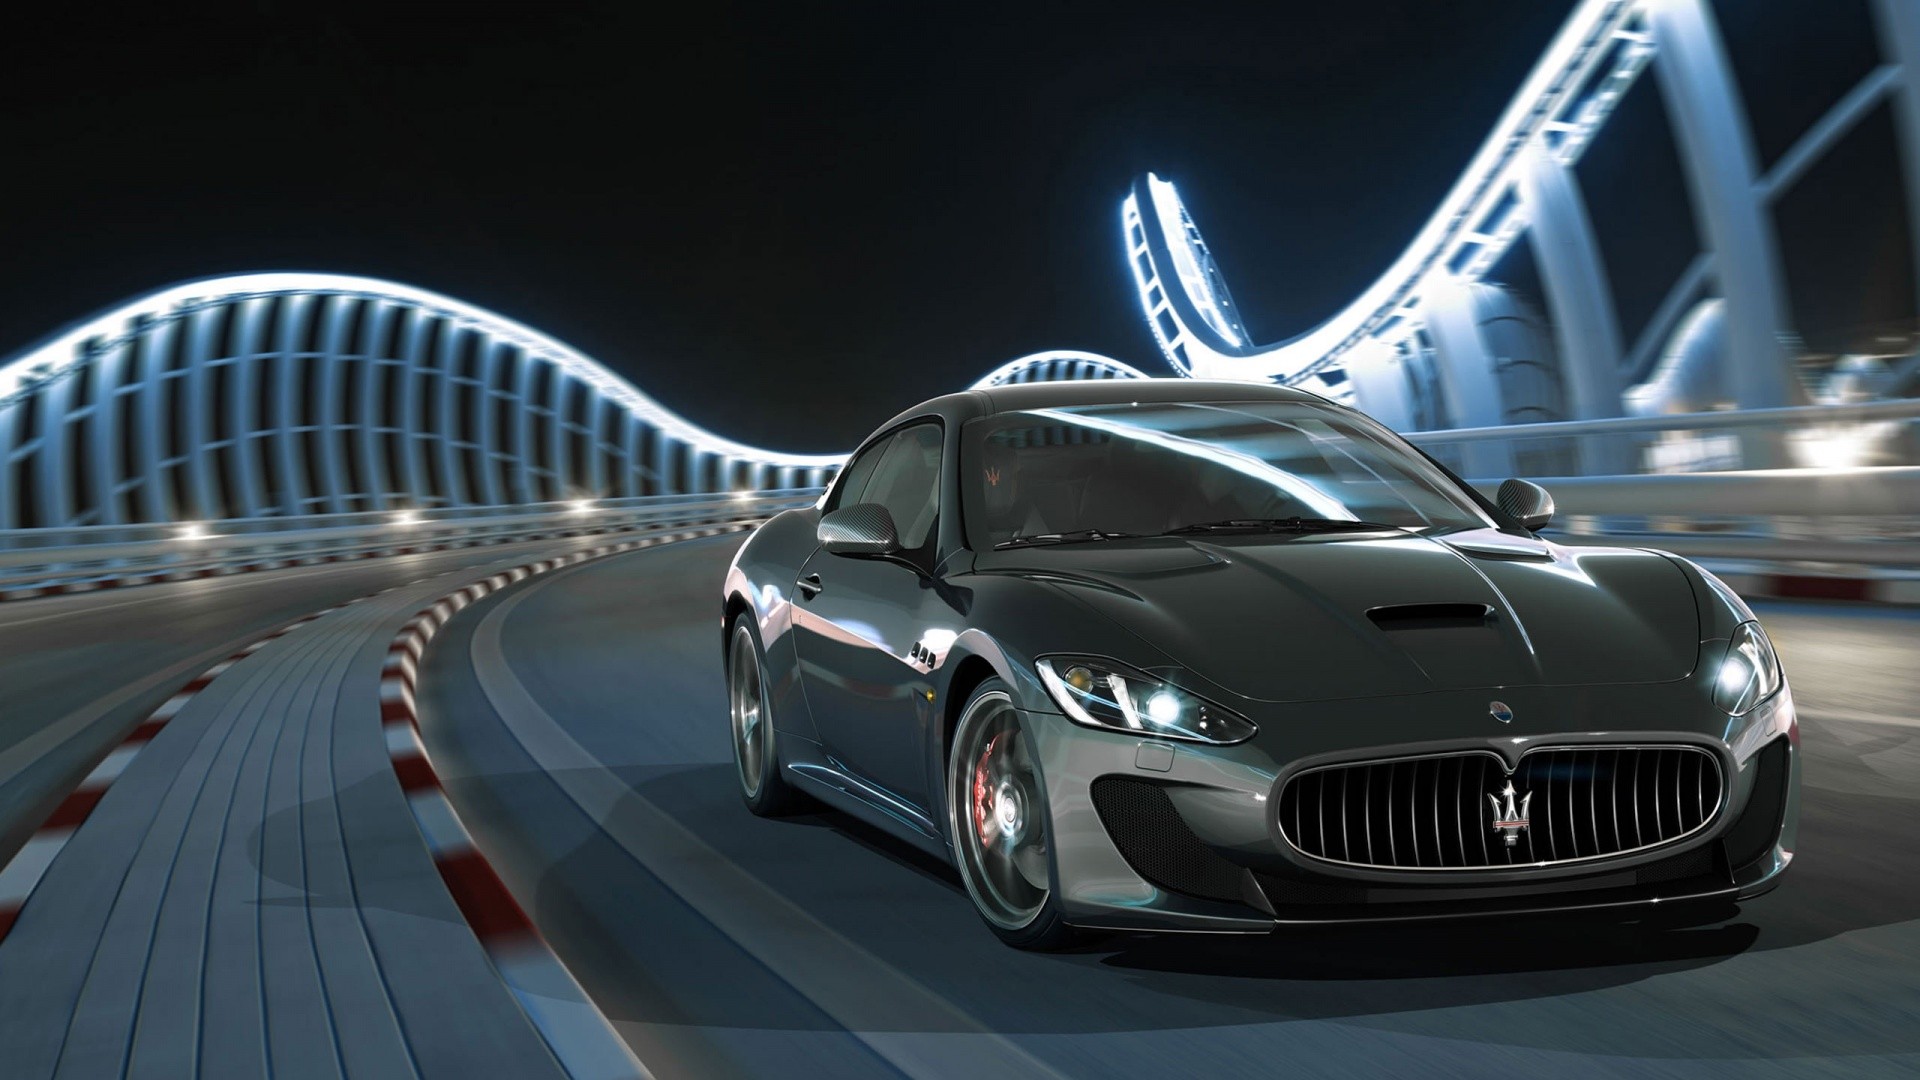 Car Maserati Wallpapers Hd Desktop And Mobile Backgrounds